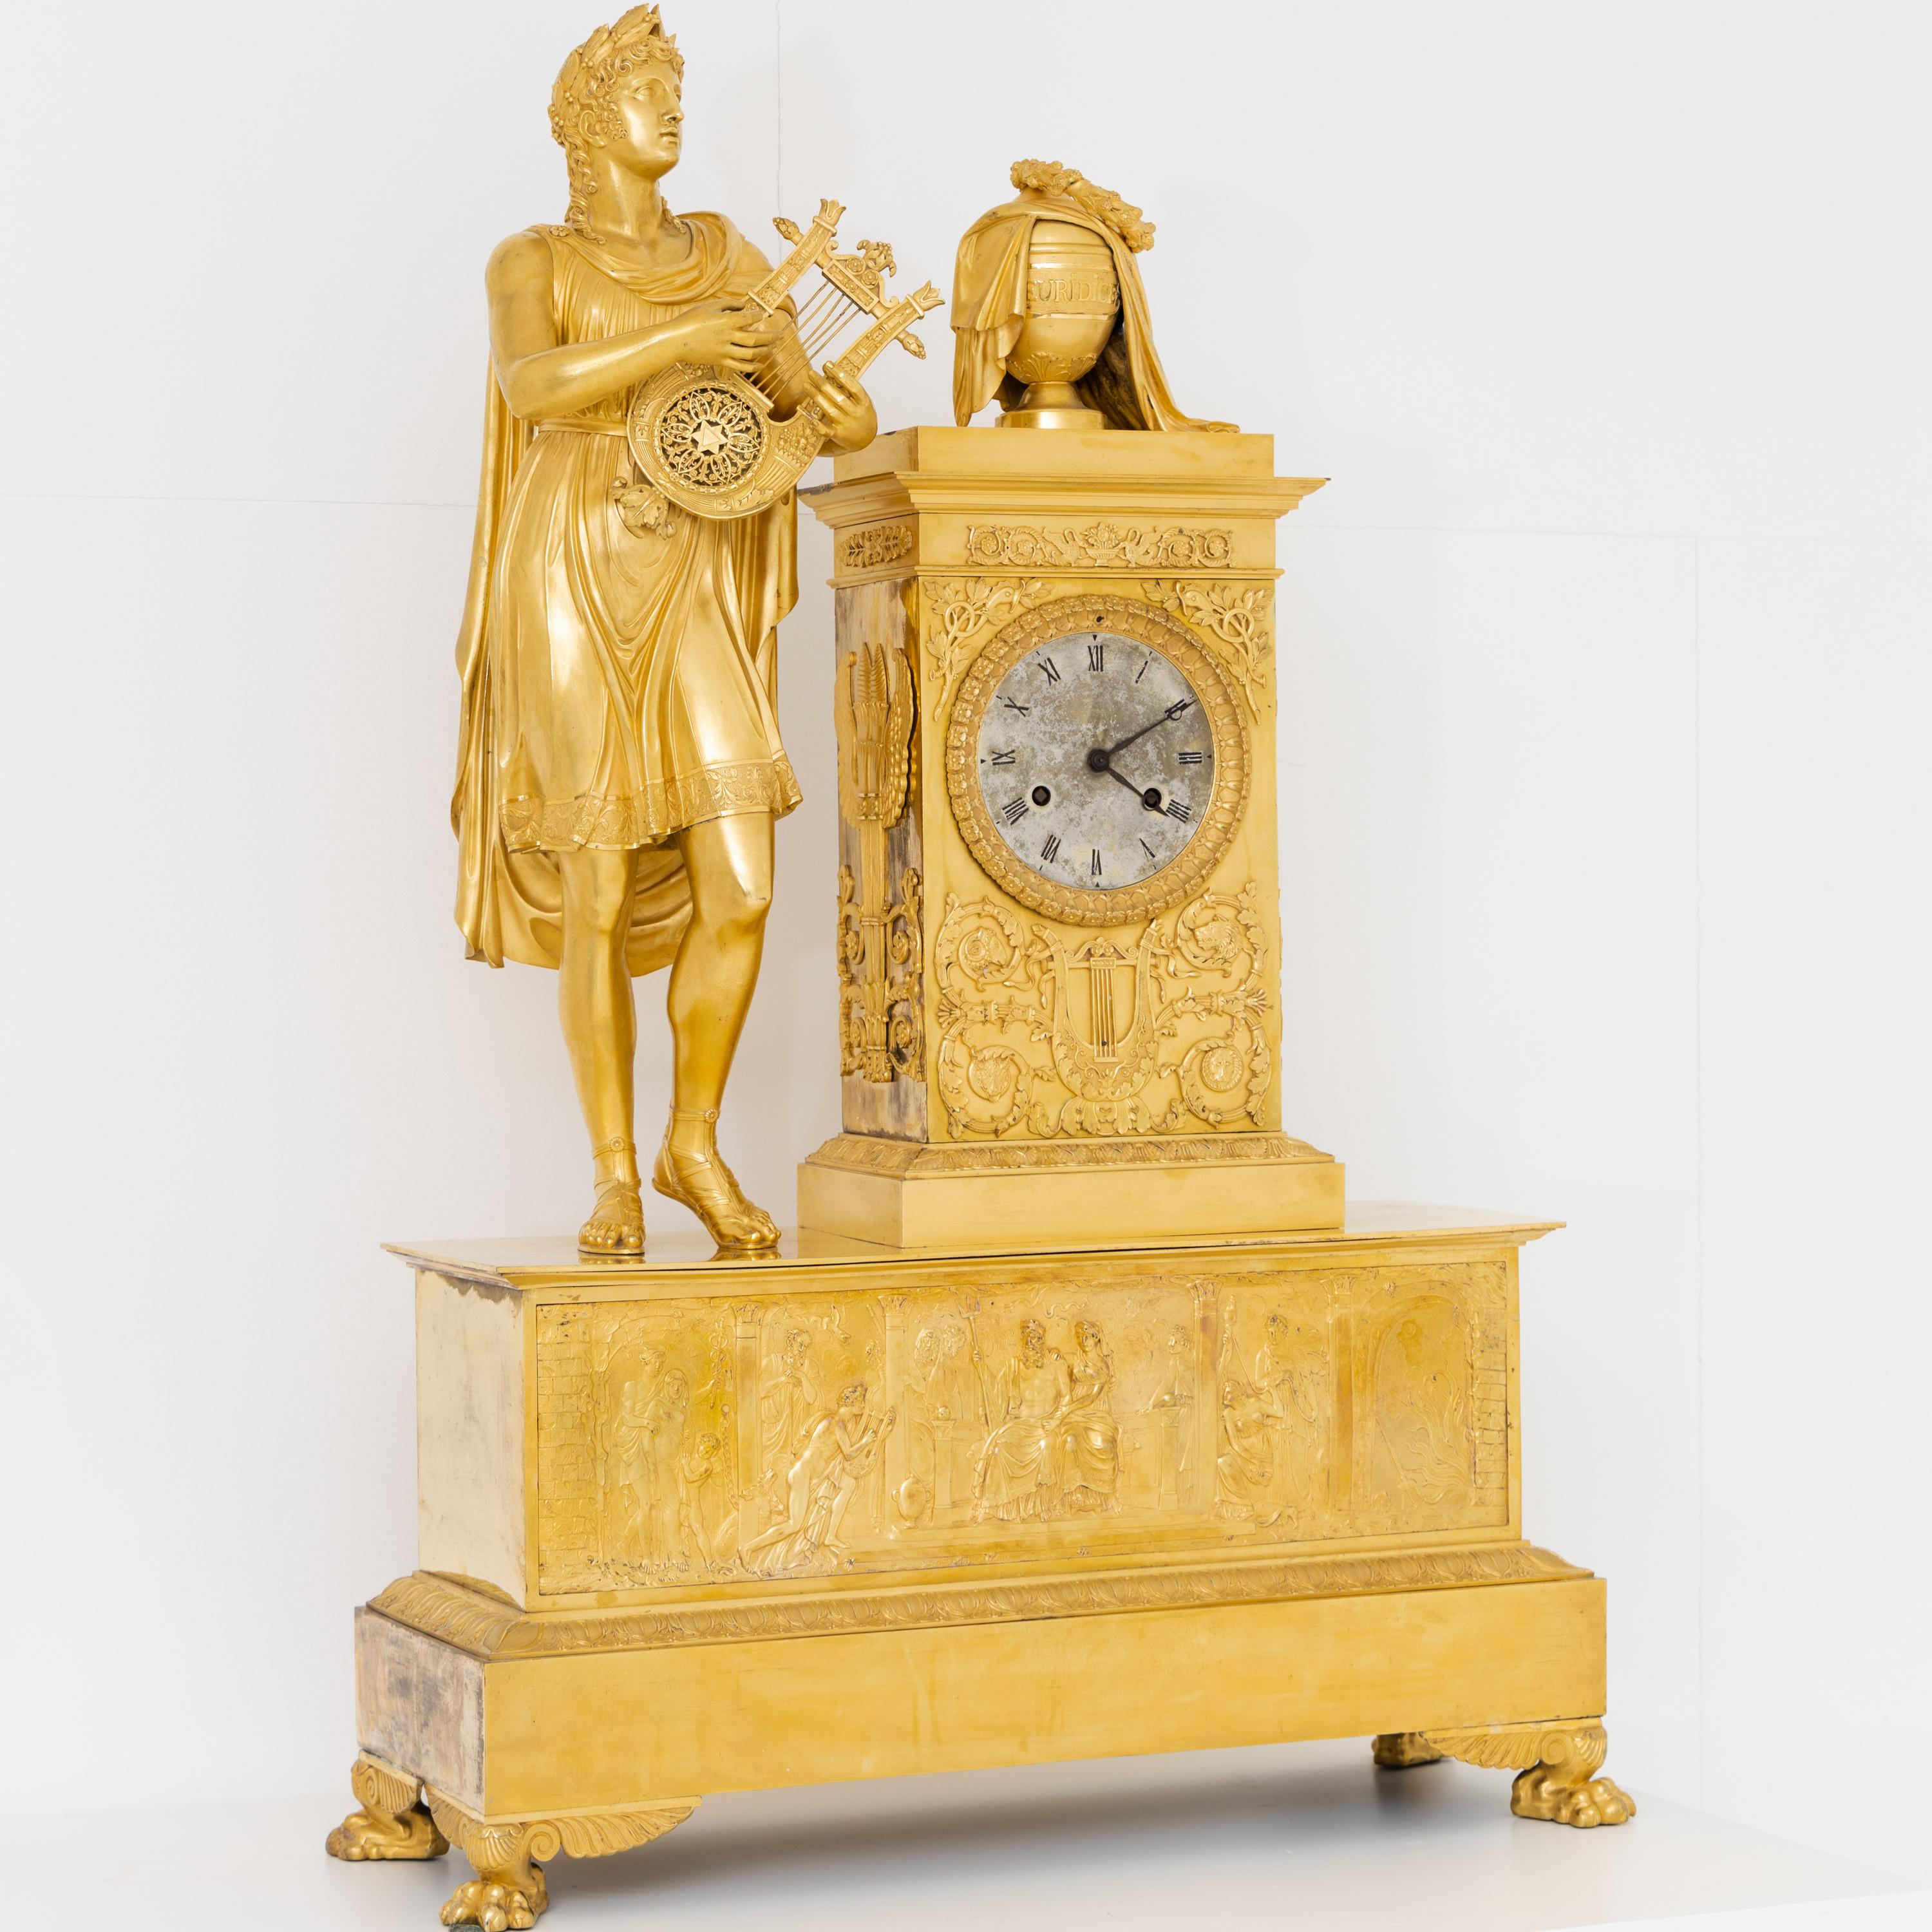 Very large pendule made of fire-gilded bronze with a fully plastic representation of Orpheus with his lute. The clock case is crowned by the urn of Eurydice. On the wide plinth multi-figured representation with Hades enthroned in the centre and